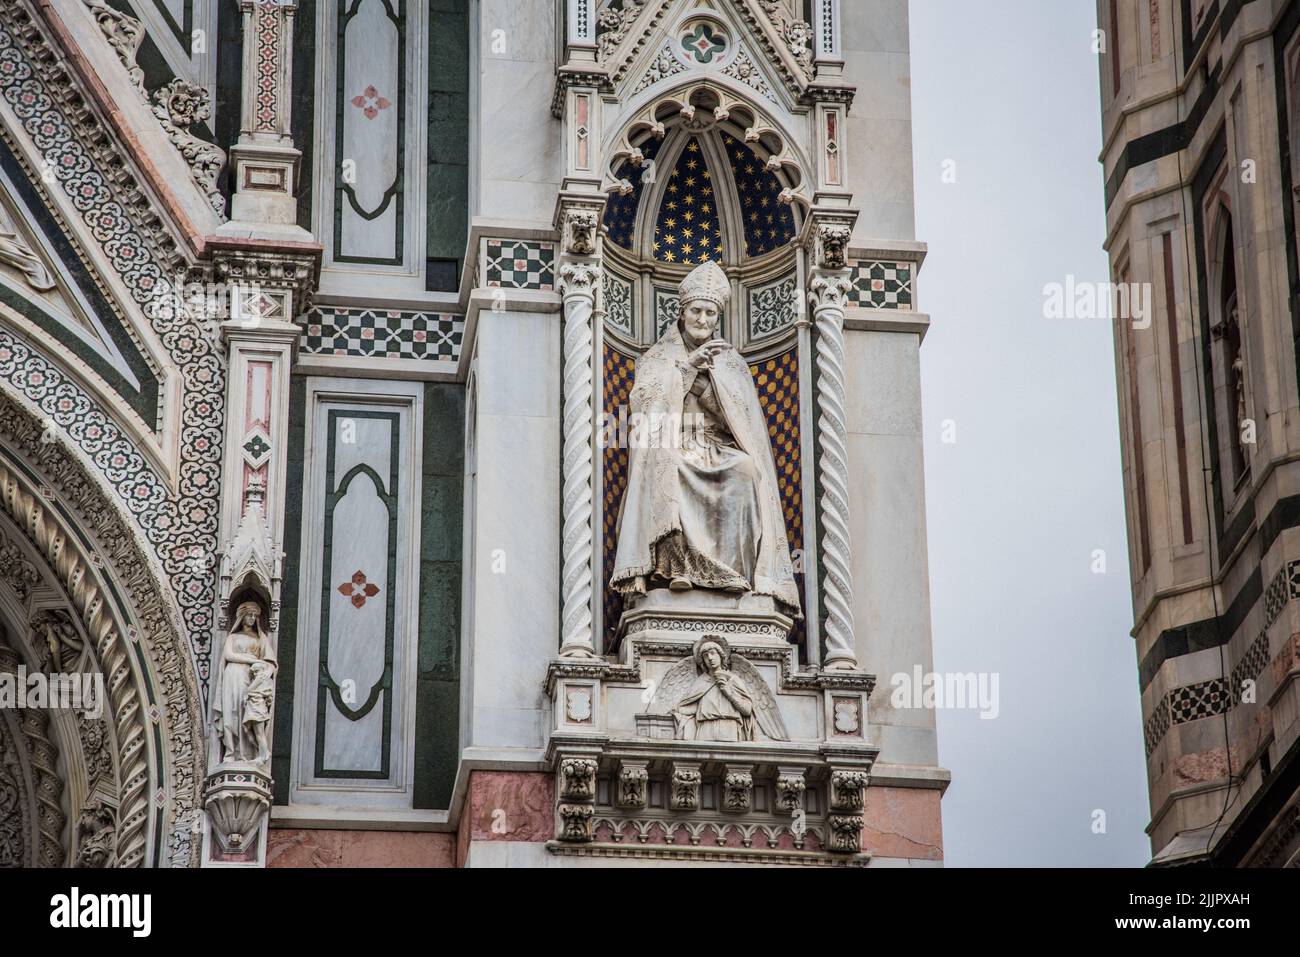 A shot of religious sculpture and artistic design on a wall of a church in Florence, Tuscany, Italy Stock Photo